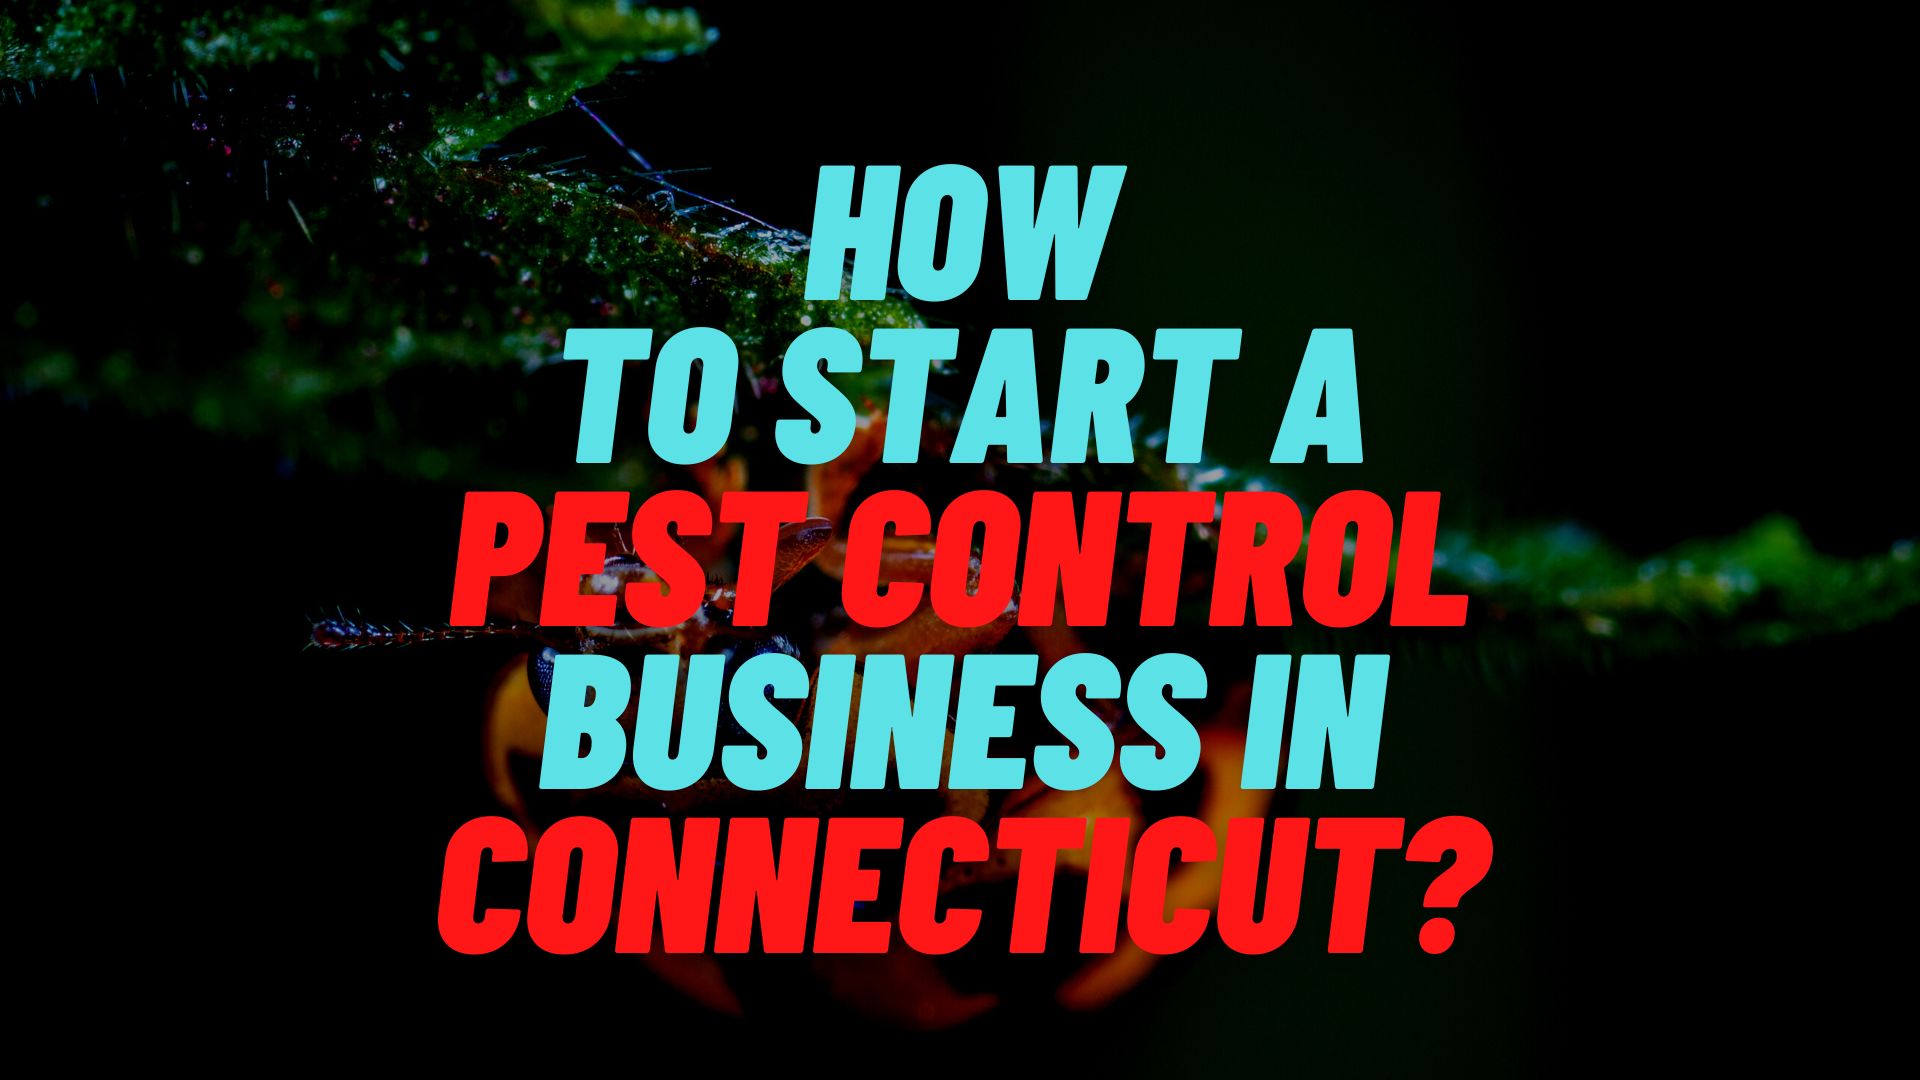 How to start a pest control business in Connecticut?